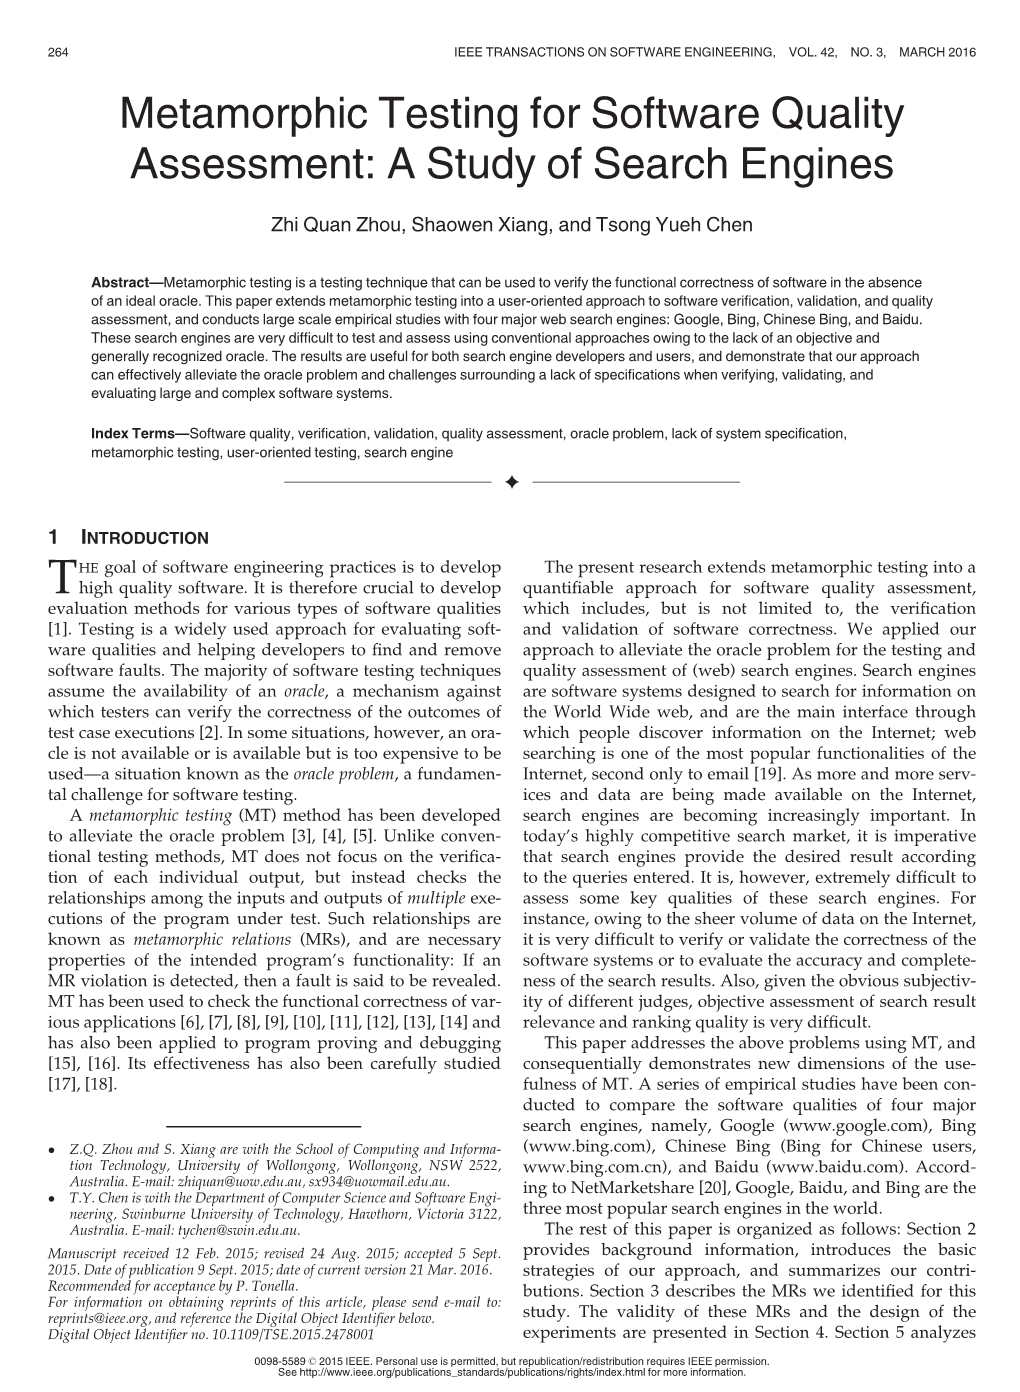 Metamorphic Testing for Software Quality Assessment: a Study of Search Engines